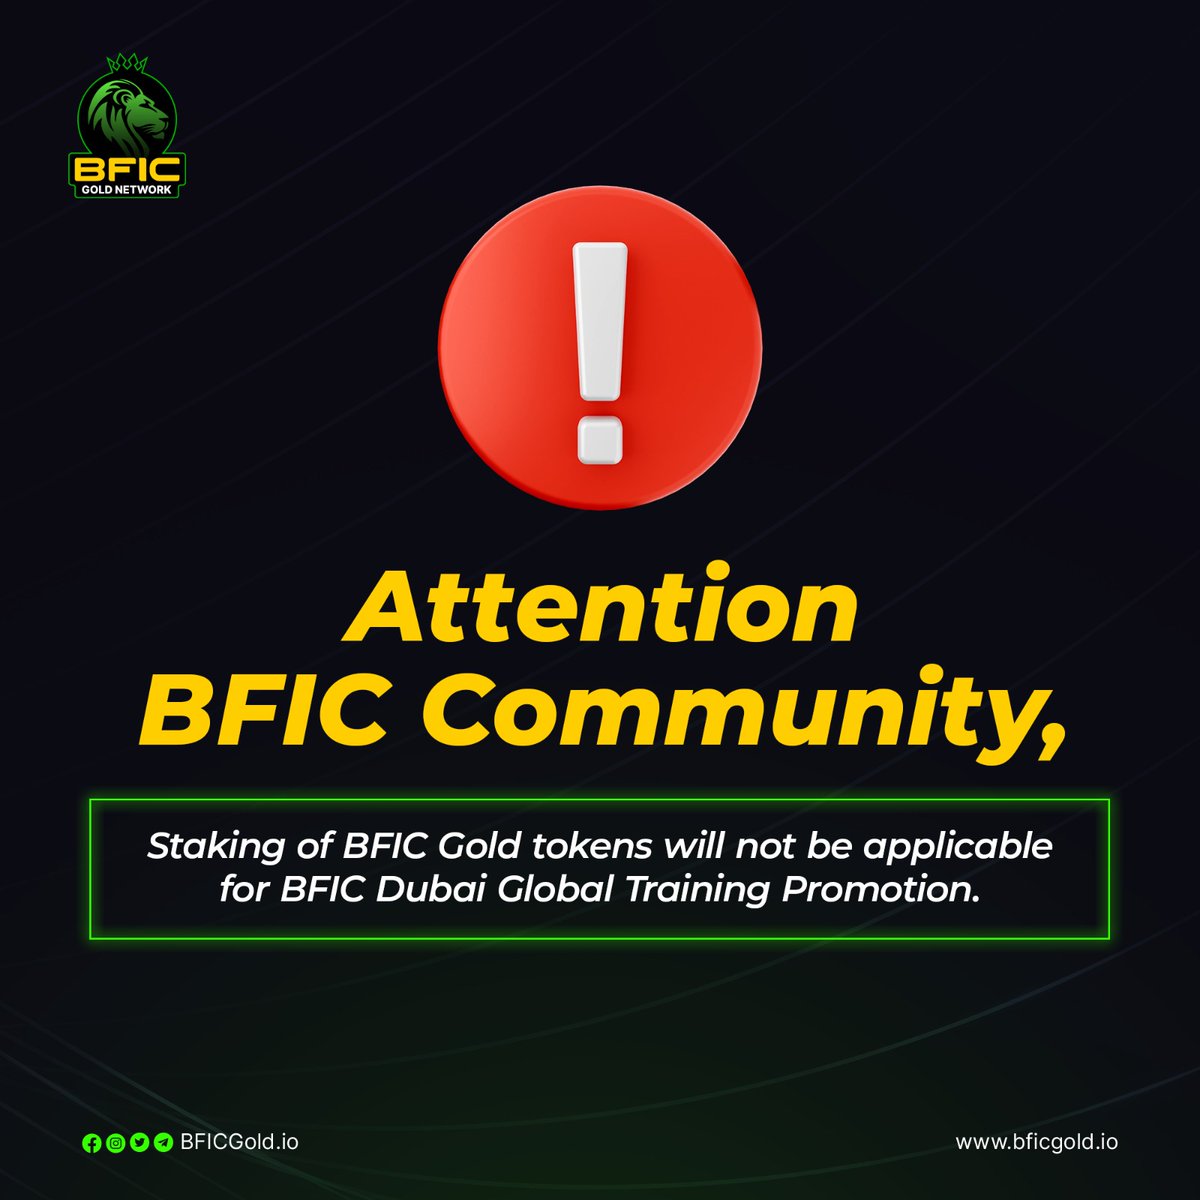 Attention BFIC Community! 🚨

Please note that staking BFIC Gold tokens will not count towards the BFIC Dubai Global Training promotion.

To qualify, stake 10,000 BFIC on each side of your binary tree. 
Win an exclusive Dubai training session for you and 10 of your associates! ⚠️